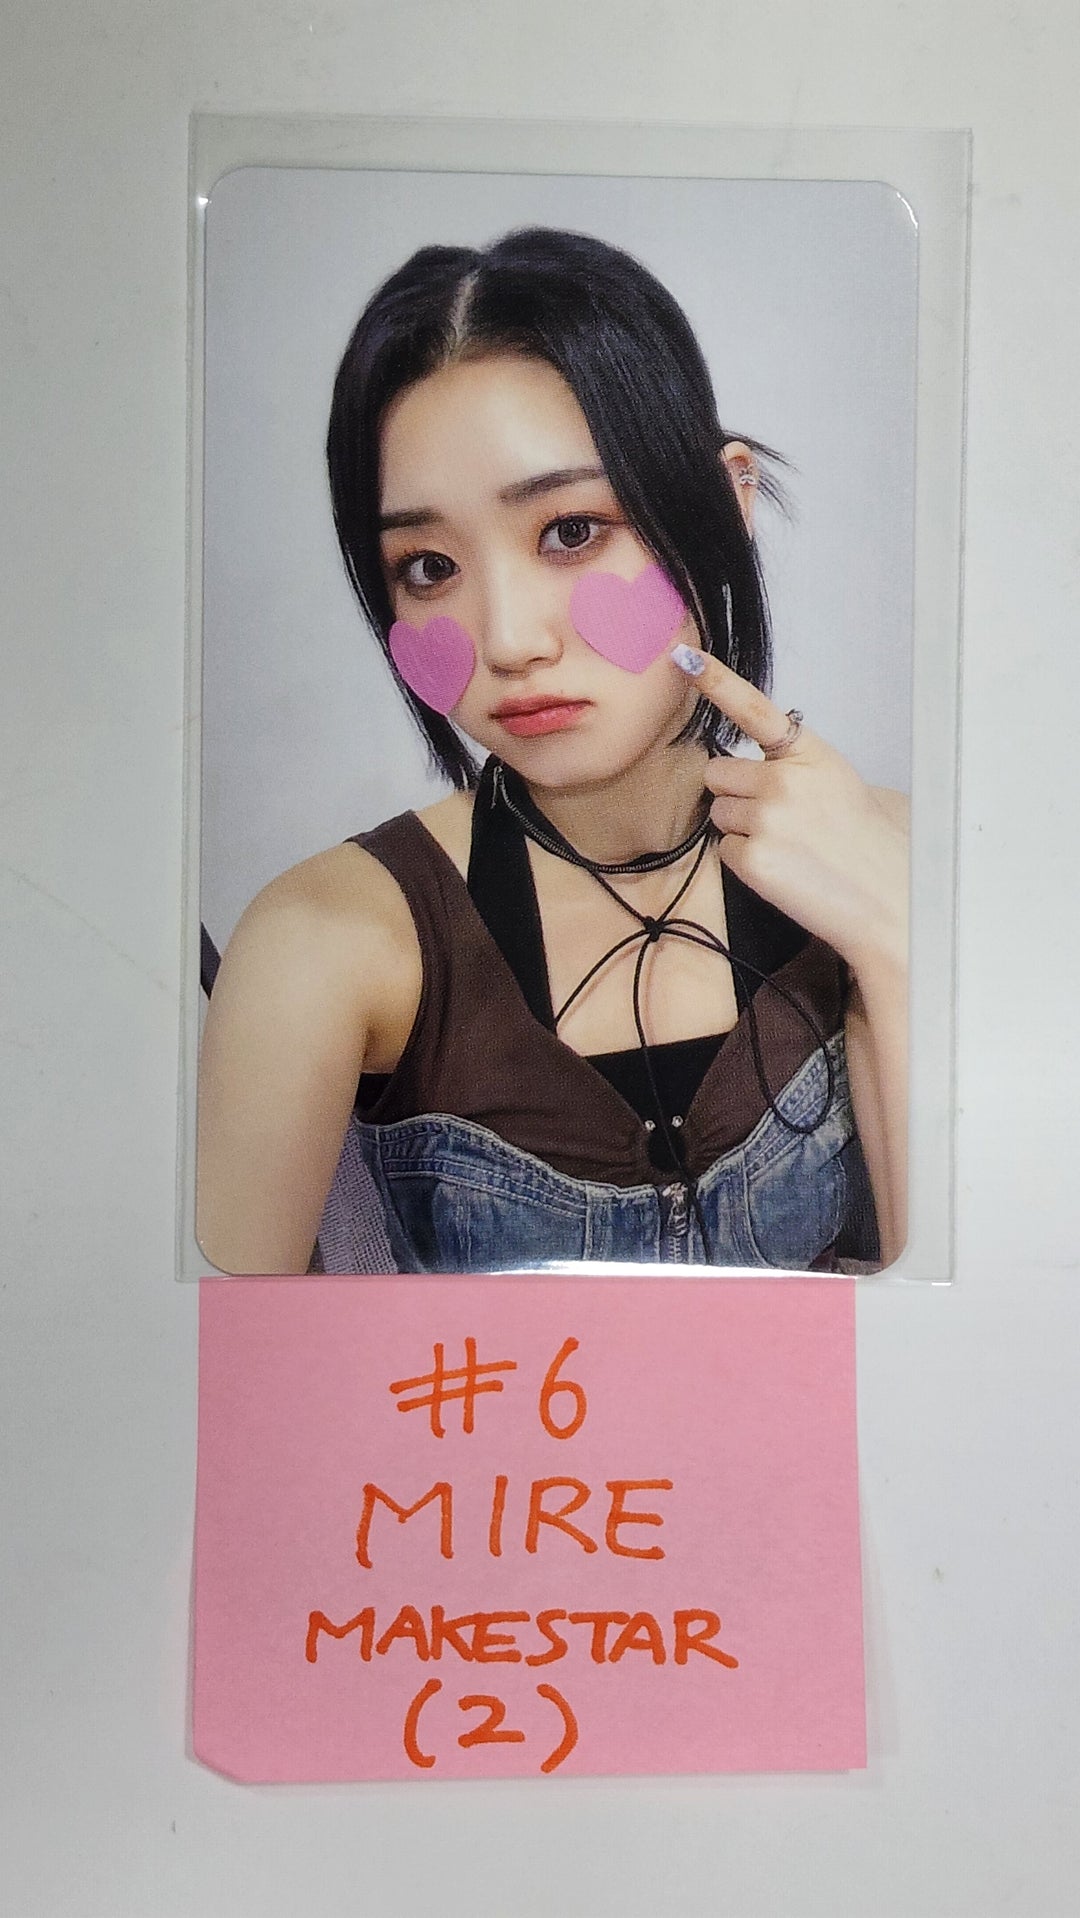 TRI.BE " W.A.Y" - Makestar Fansign Event Photocard Round 3